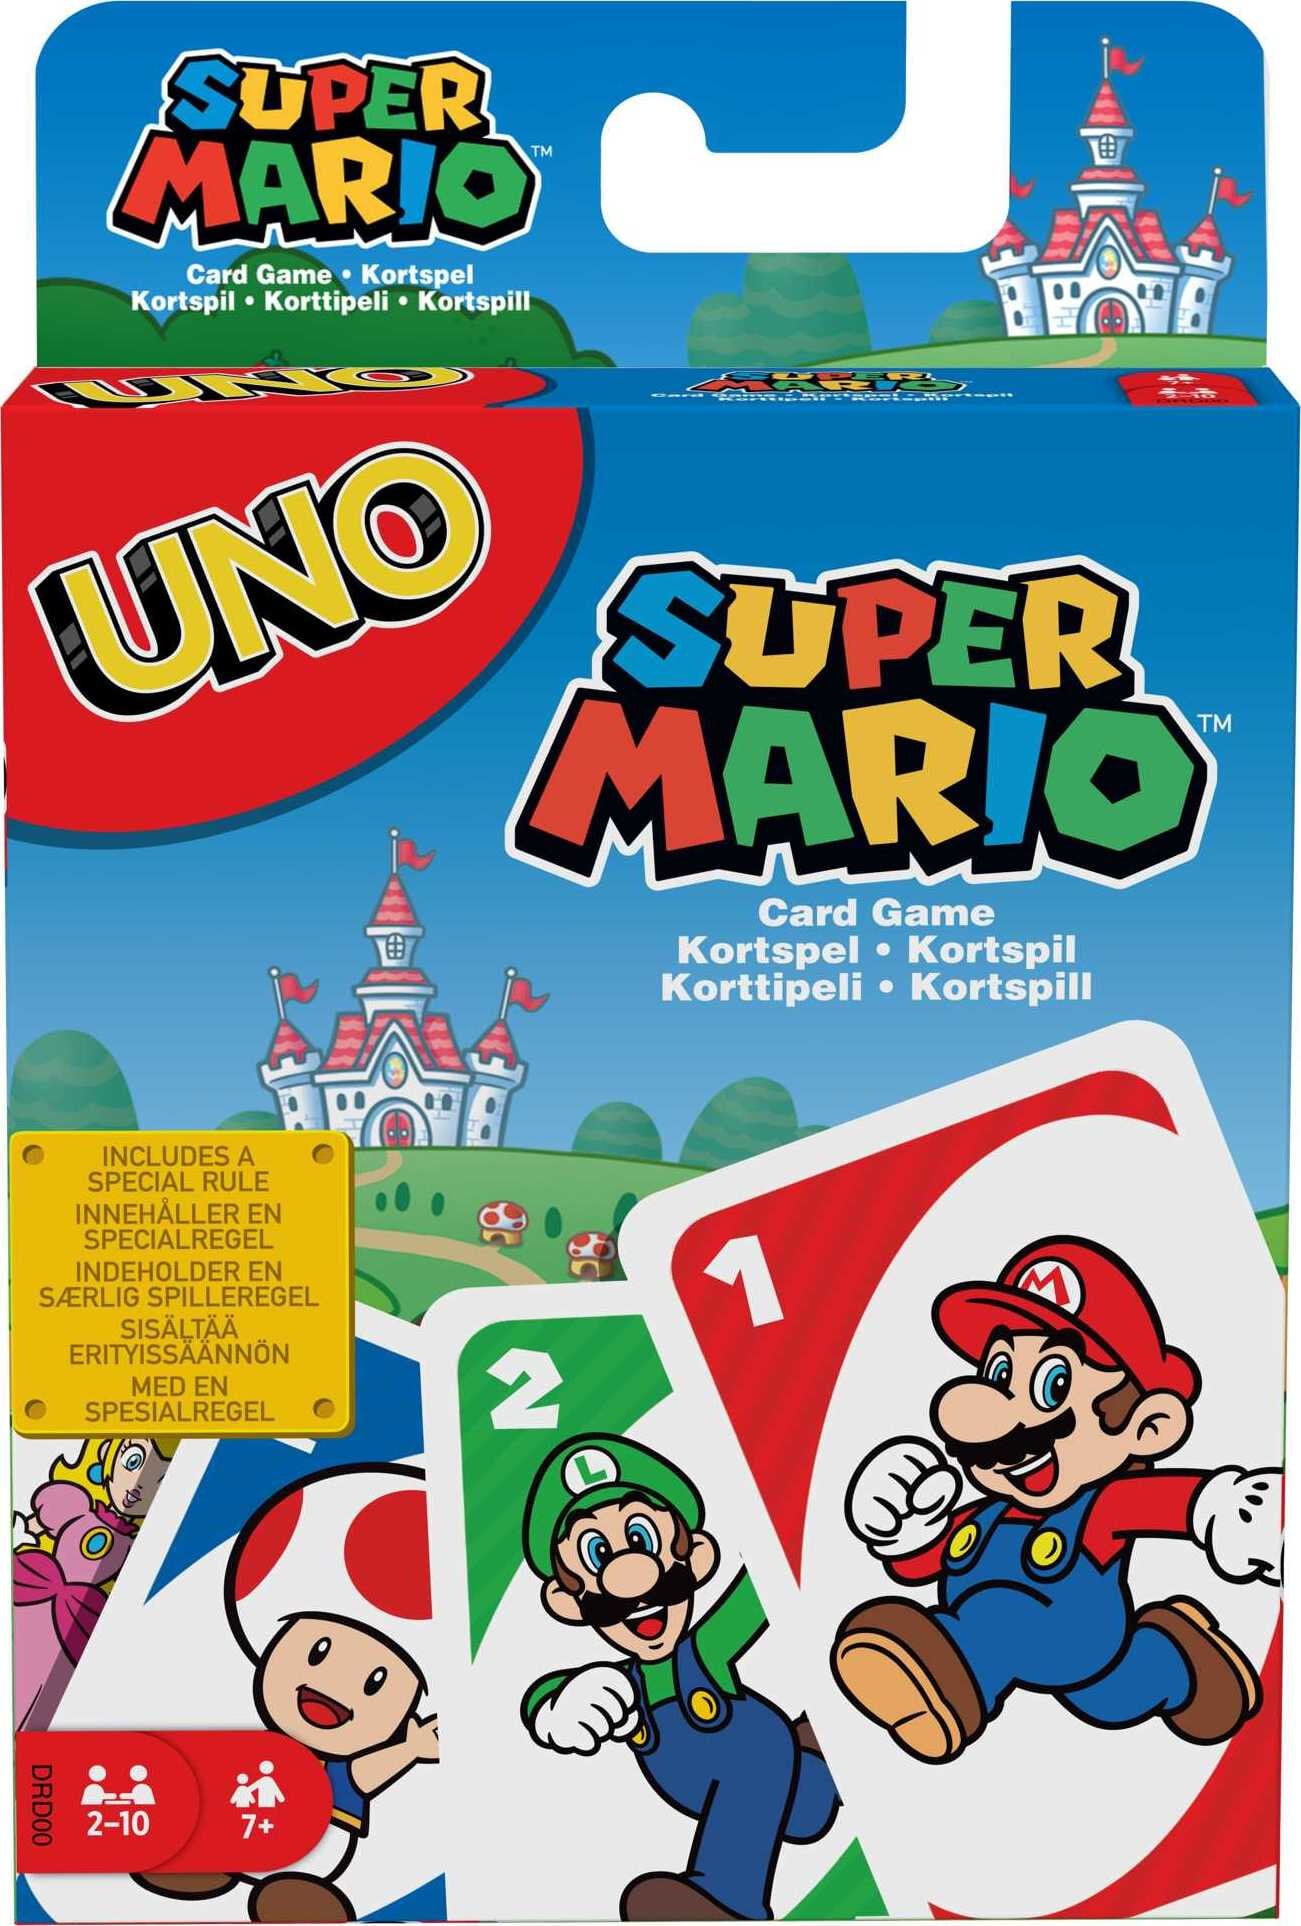 UNO Card Game Super Mario Theme for 2-10 Players Ages 7Y+